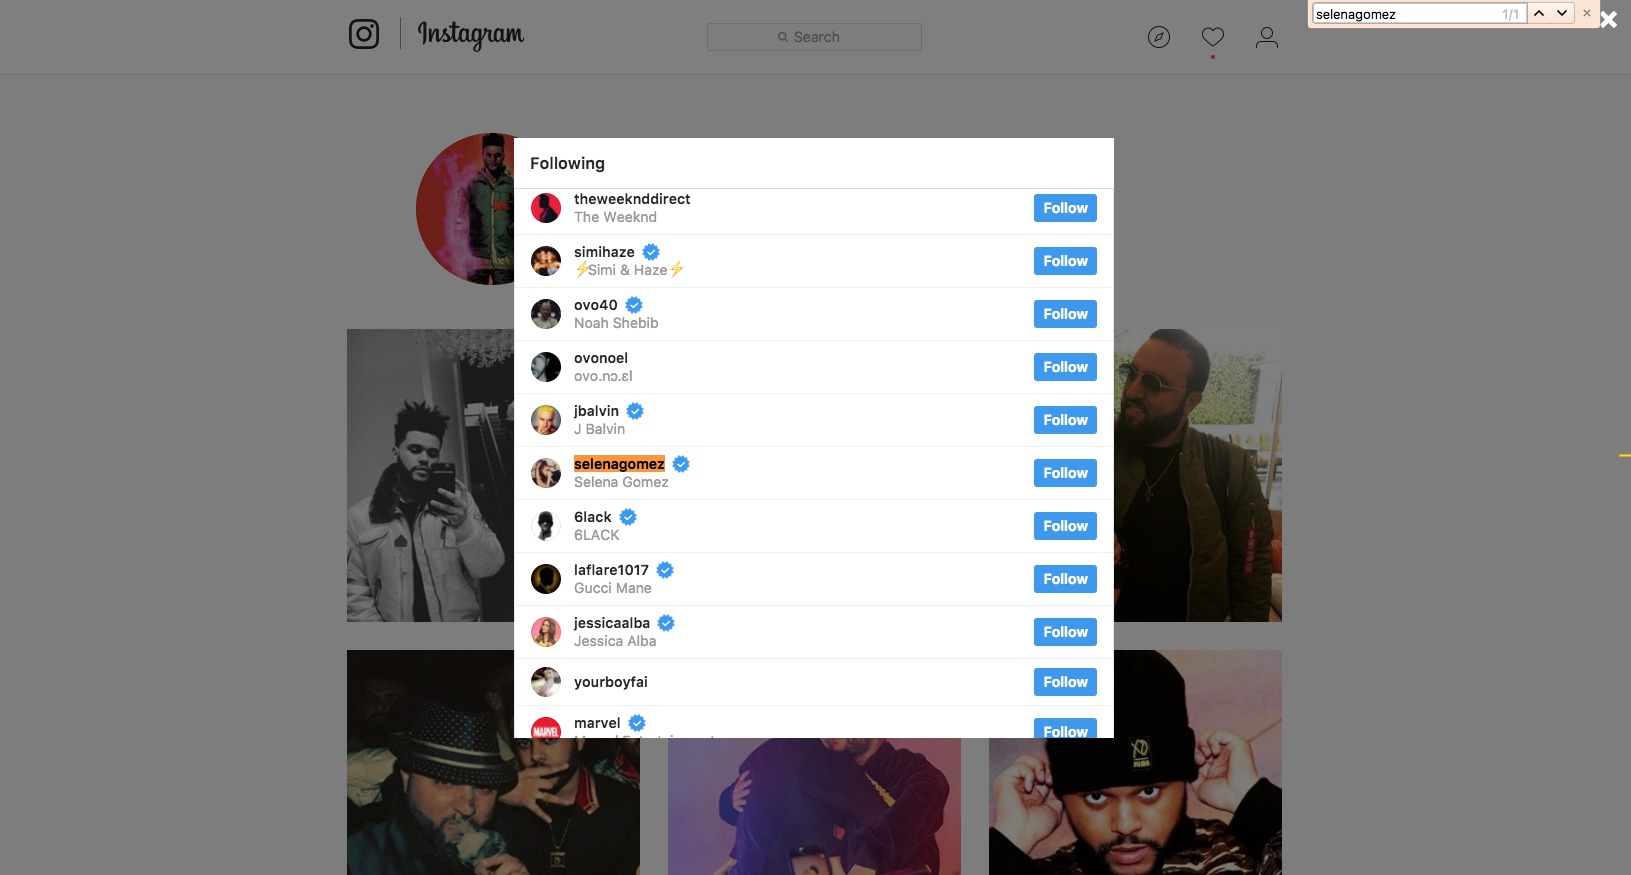 picture-of-the-weeknd-instagram-following-photo.jpg